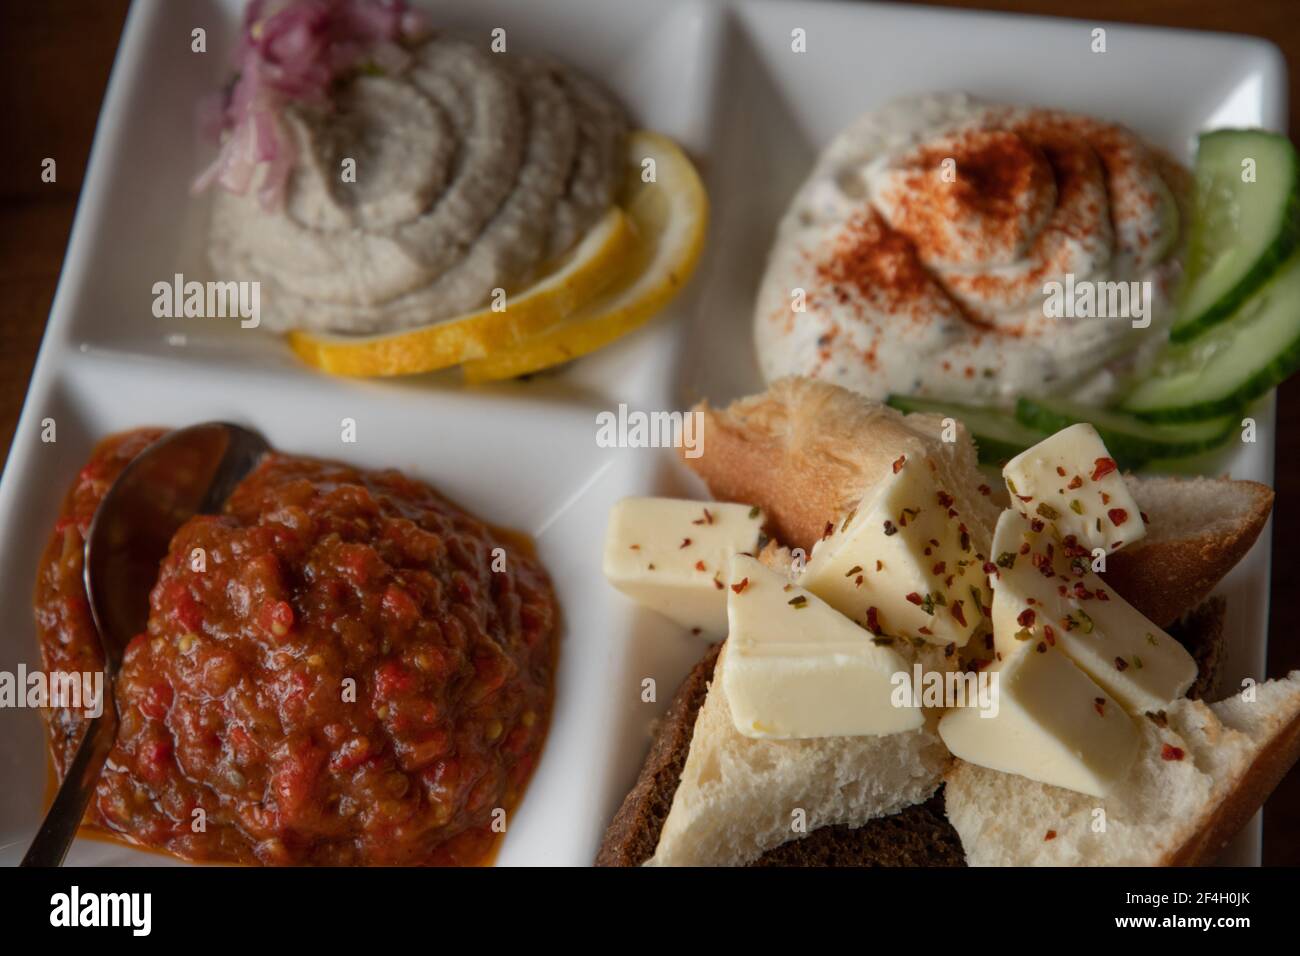 Closeup of butter pieces with spicy seasonings. White crockery plate with mezze tasting set of assorted pate pastes and appetizers with bread toasts. Stock Photo